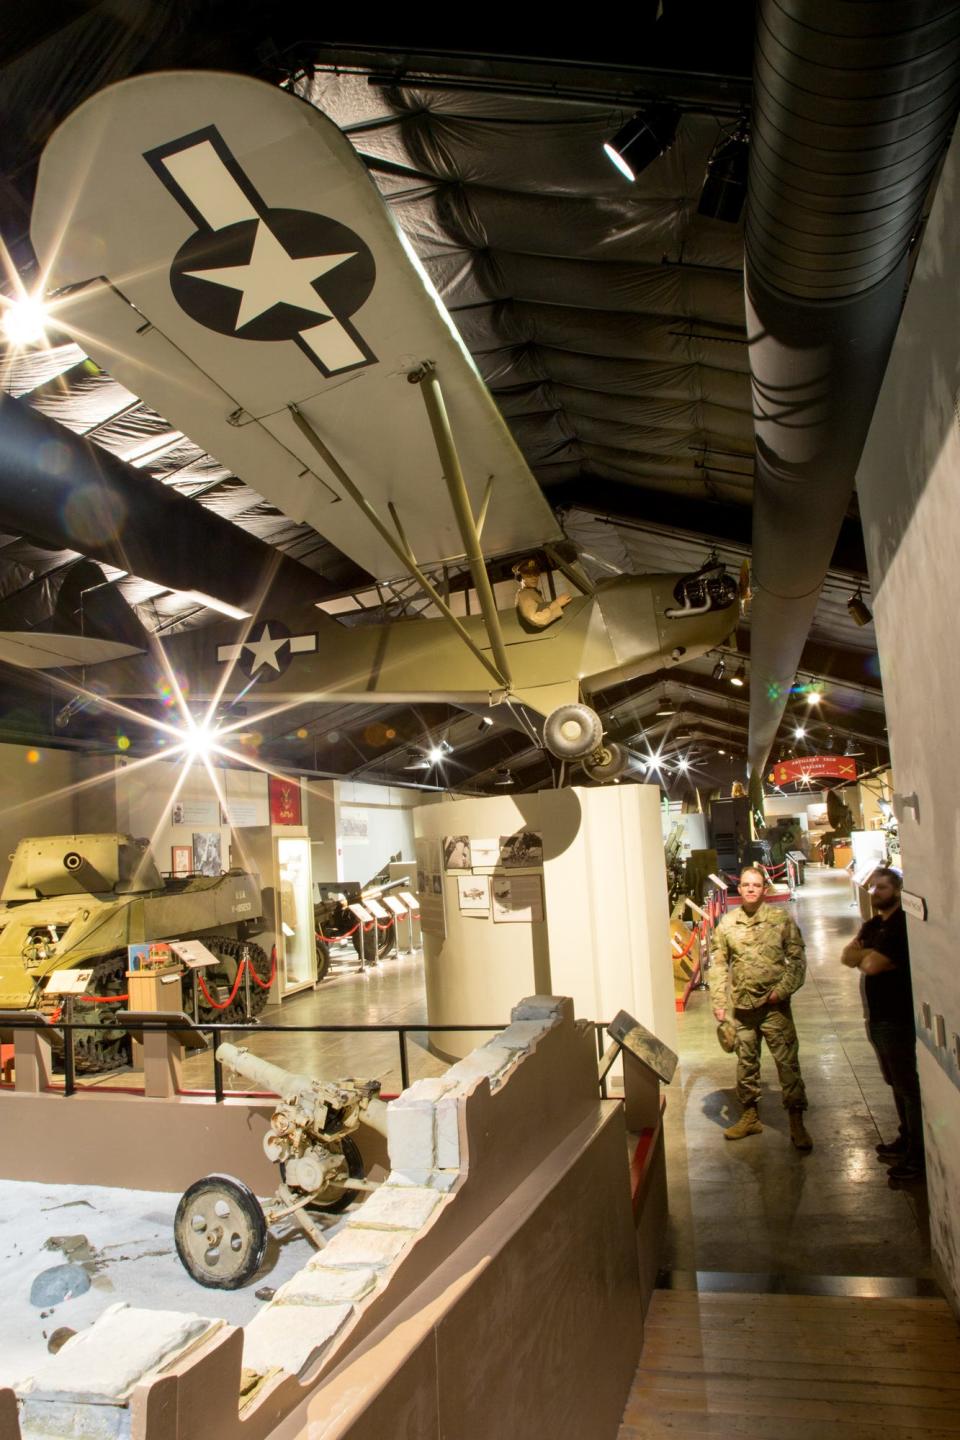 The U.S. Army Artillery Museum, part of the Fort Sill National Historical Landmark and Museum complex in Lawton, tells the story of the artillery from 1775 to the present with over 70 guns and artillery pieces and numerous other artifacts.